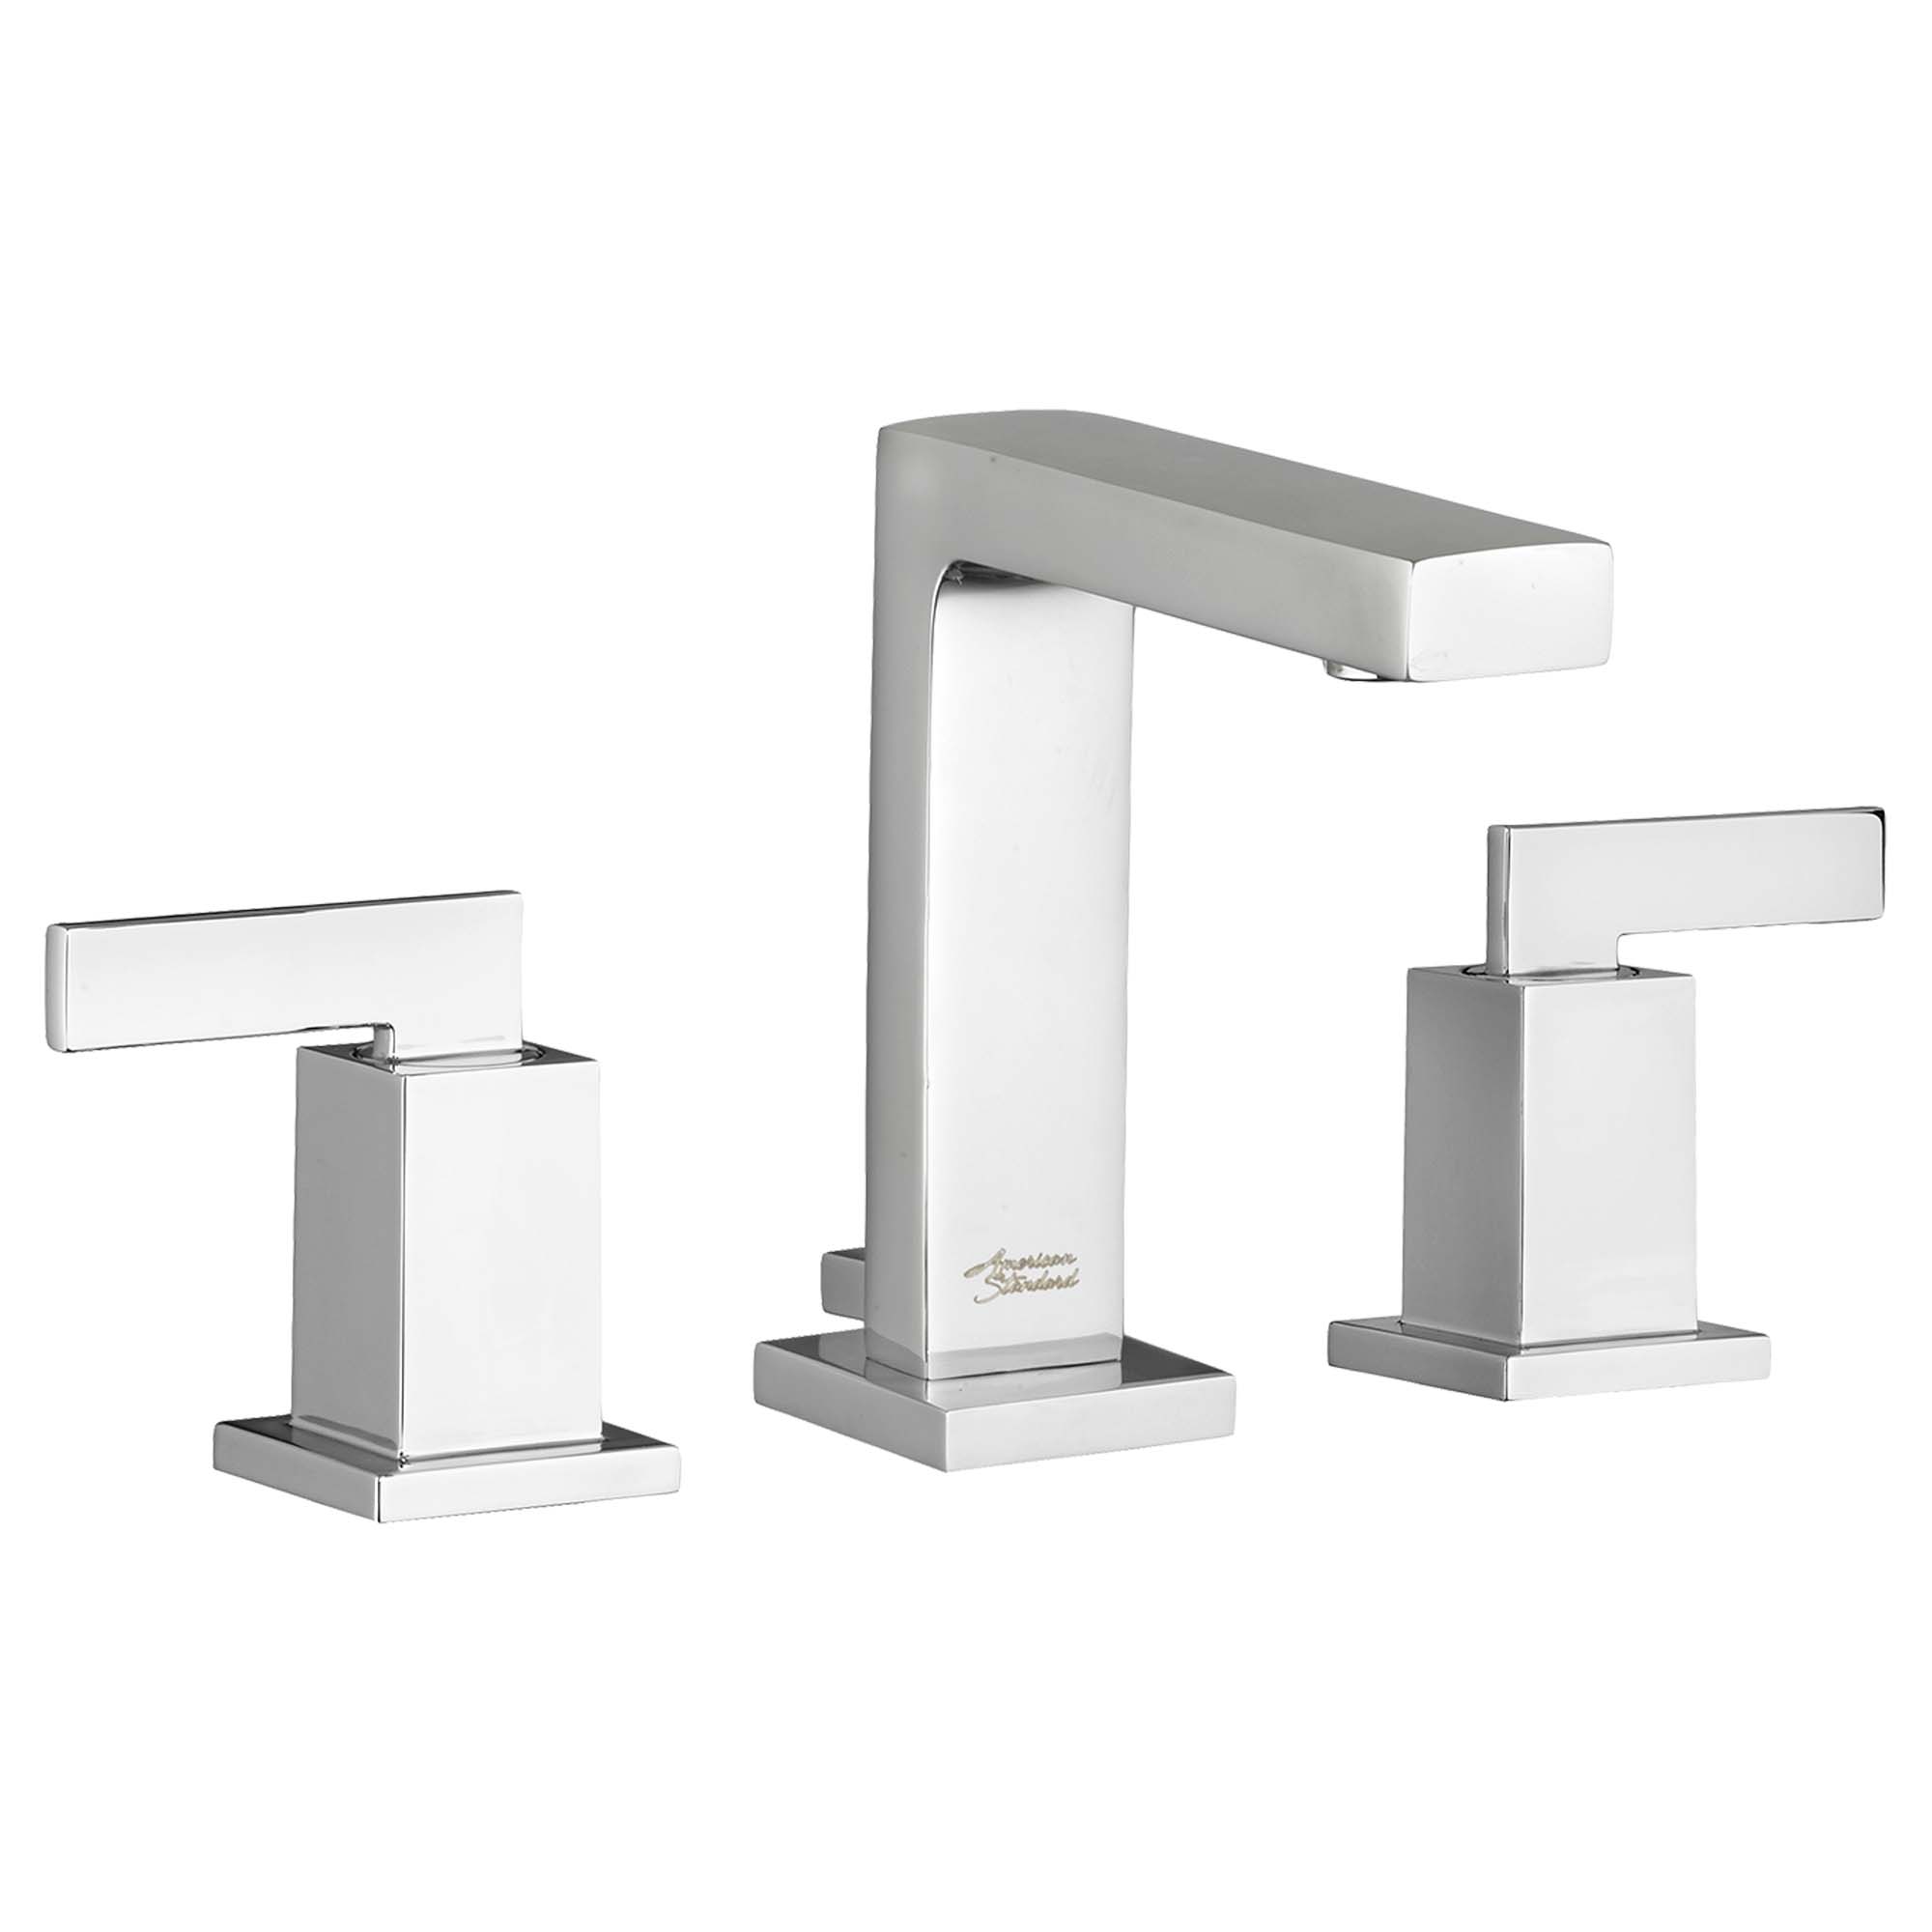 Time Square® 8-Inch Widespread 2-Handle Bathroom Faucet 1.2 gpm/4.5 L/min With Lever Handles